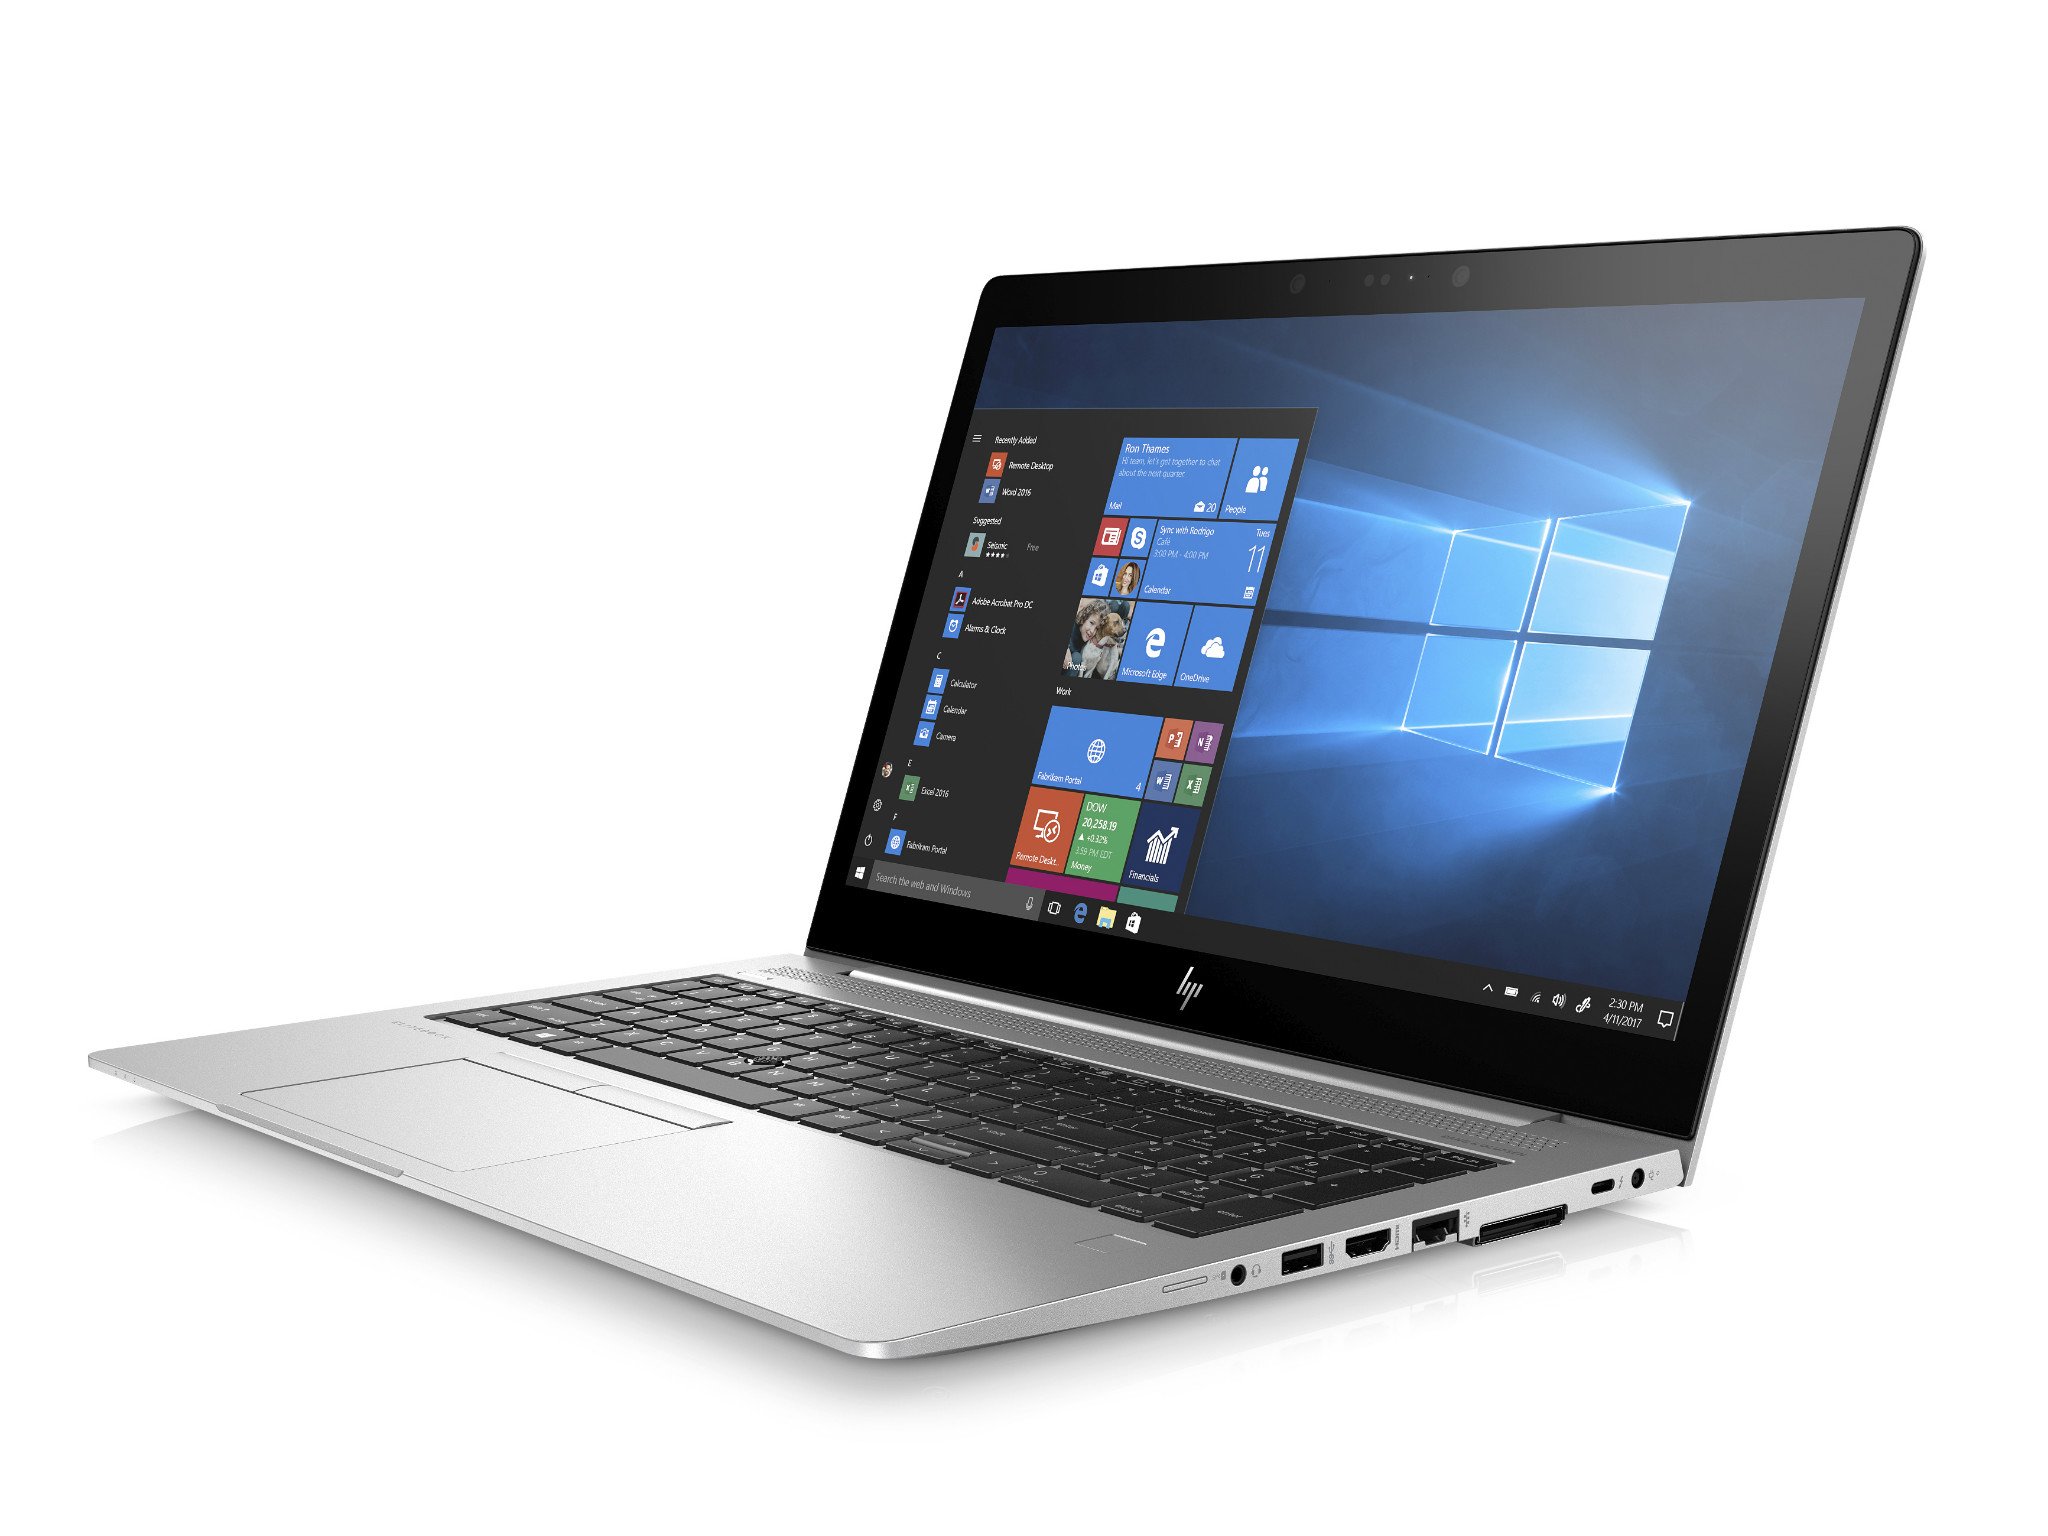 HP launches new EliteBook 700 series PCs and thin clients